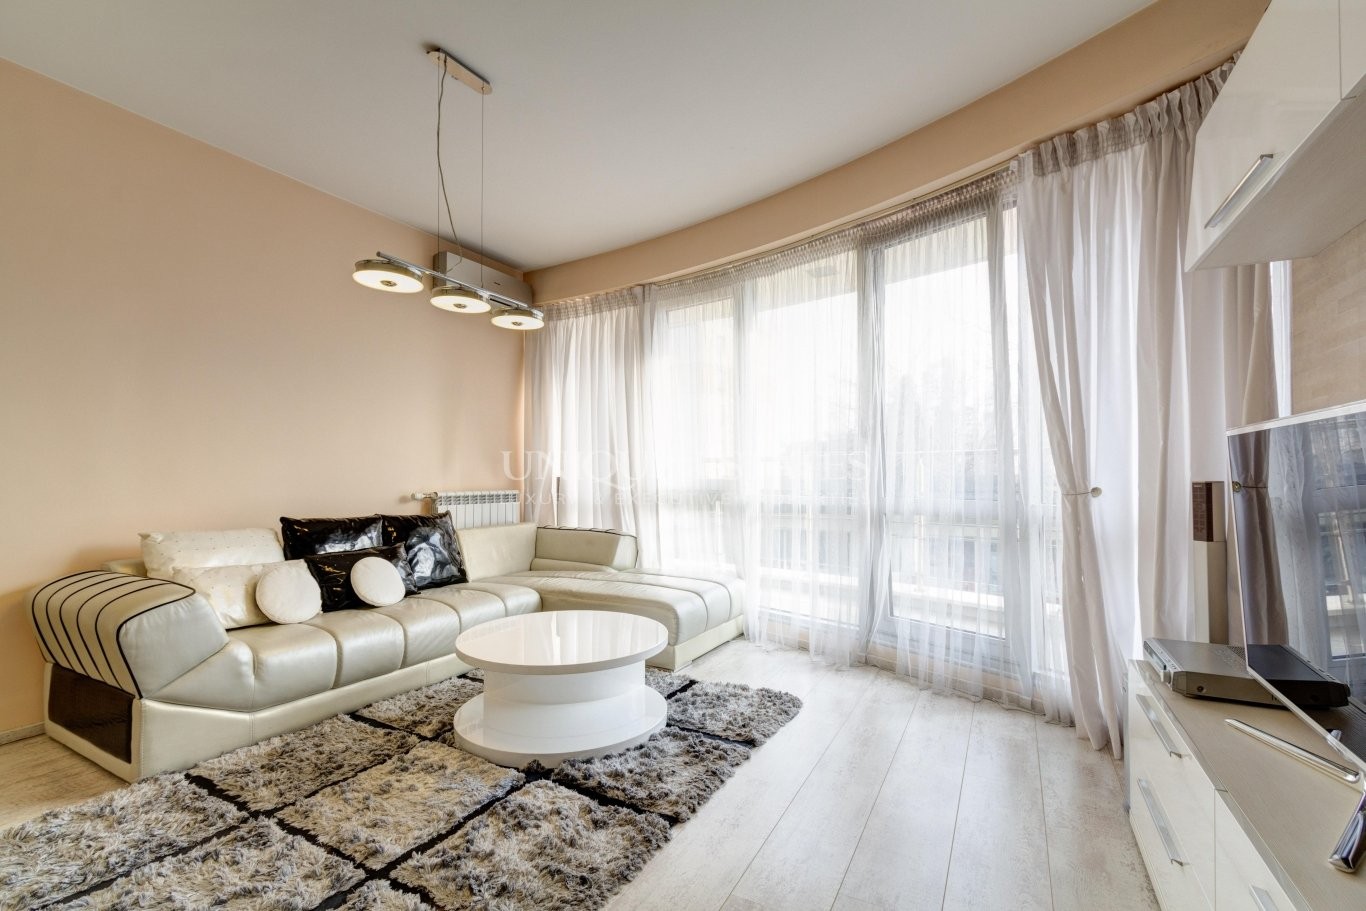 Apartment for rent in Sofia, Iztok with listing ID: K6162 - image 2